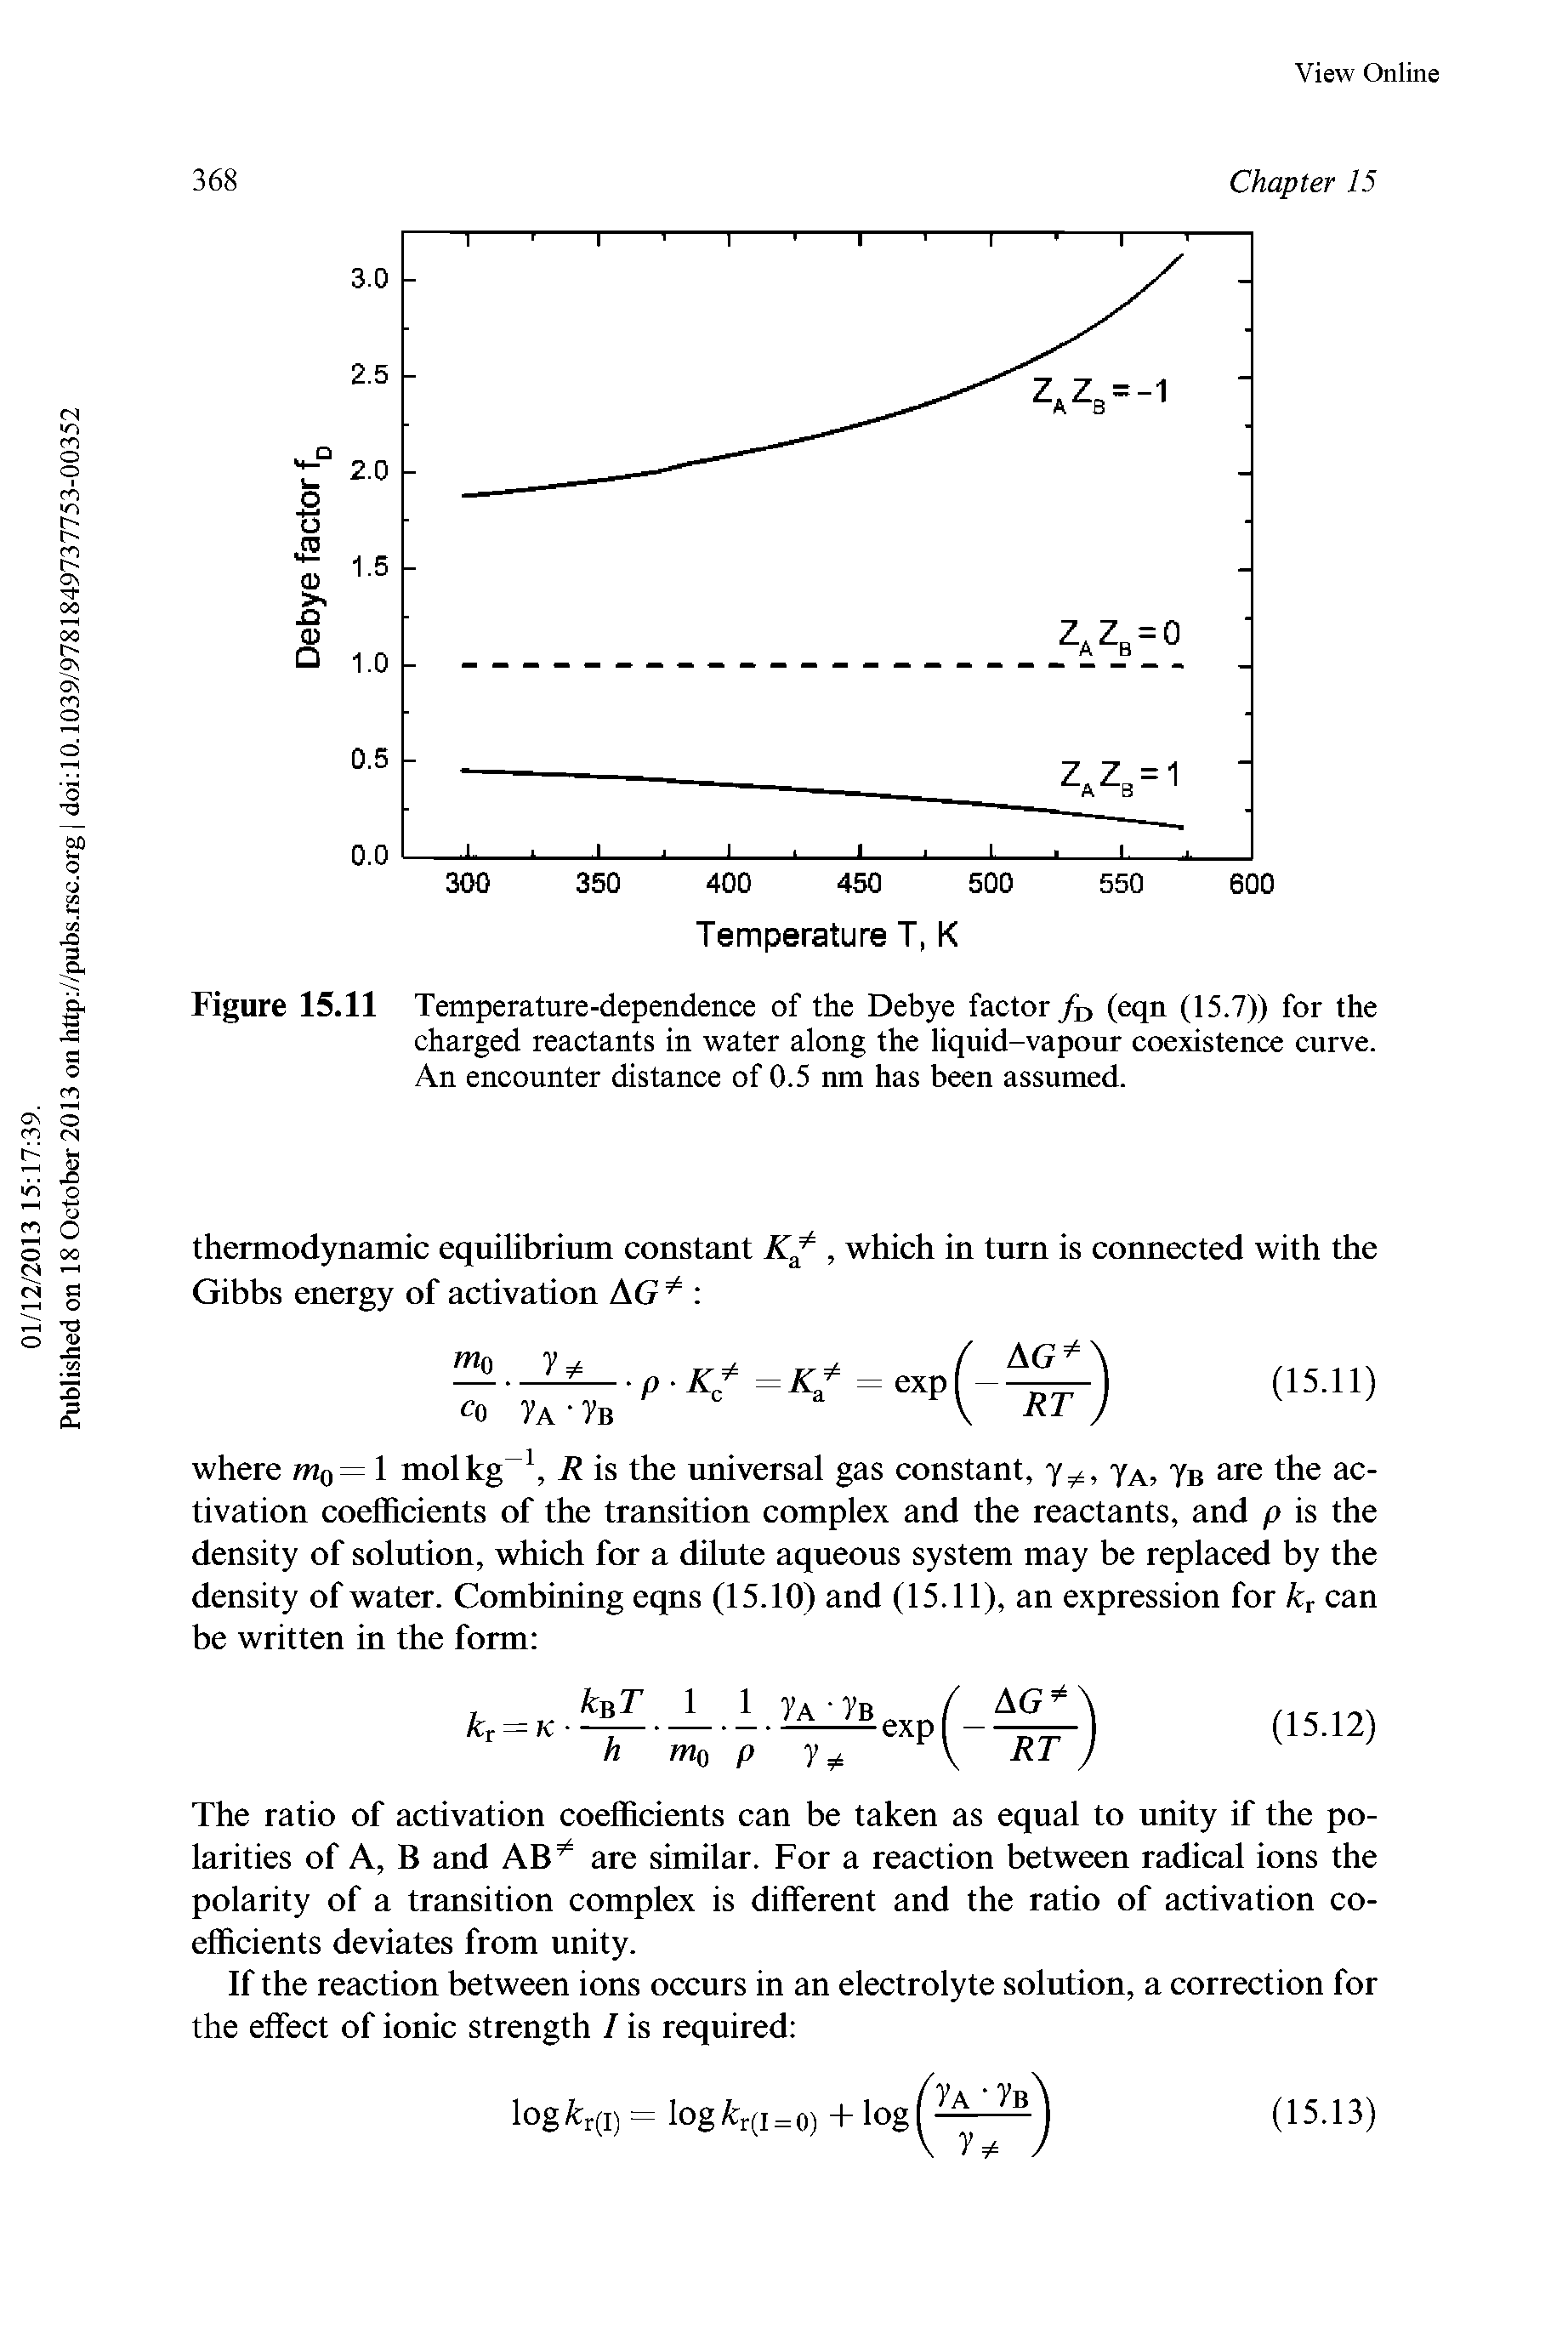 Figure 15.11 Temperature-dependence of the Debye factor /d (eqn (15.7)) for the charged reactants in water along the liquid-vapour coexistence curve. An encounter distance of 0.5 nm has been assumed.